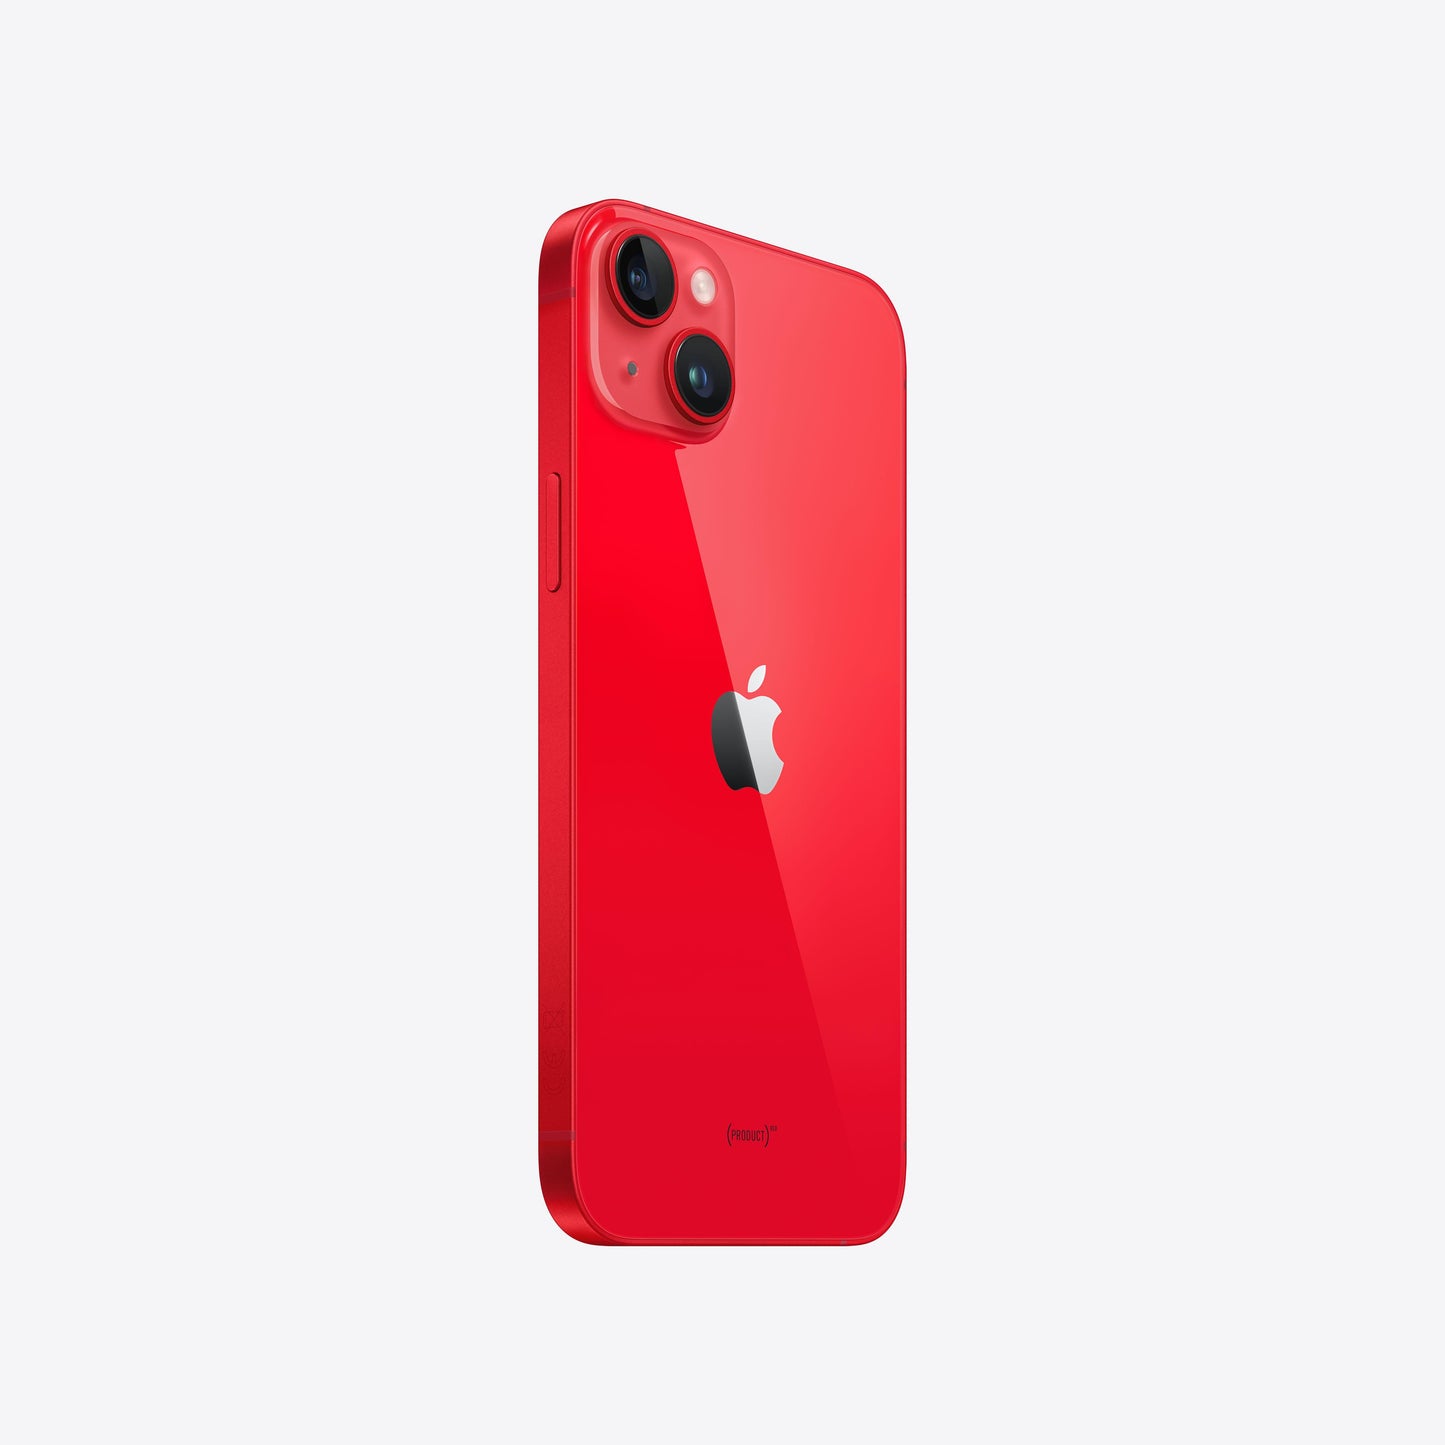 iPhone 14 Plus 512GB (PRODUCT)RED